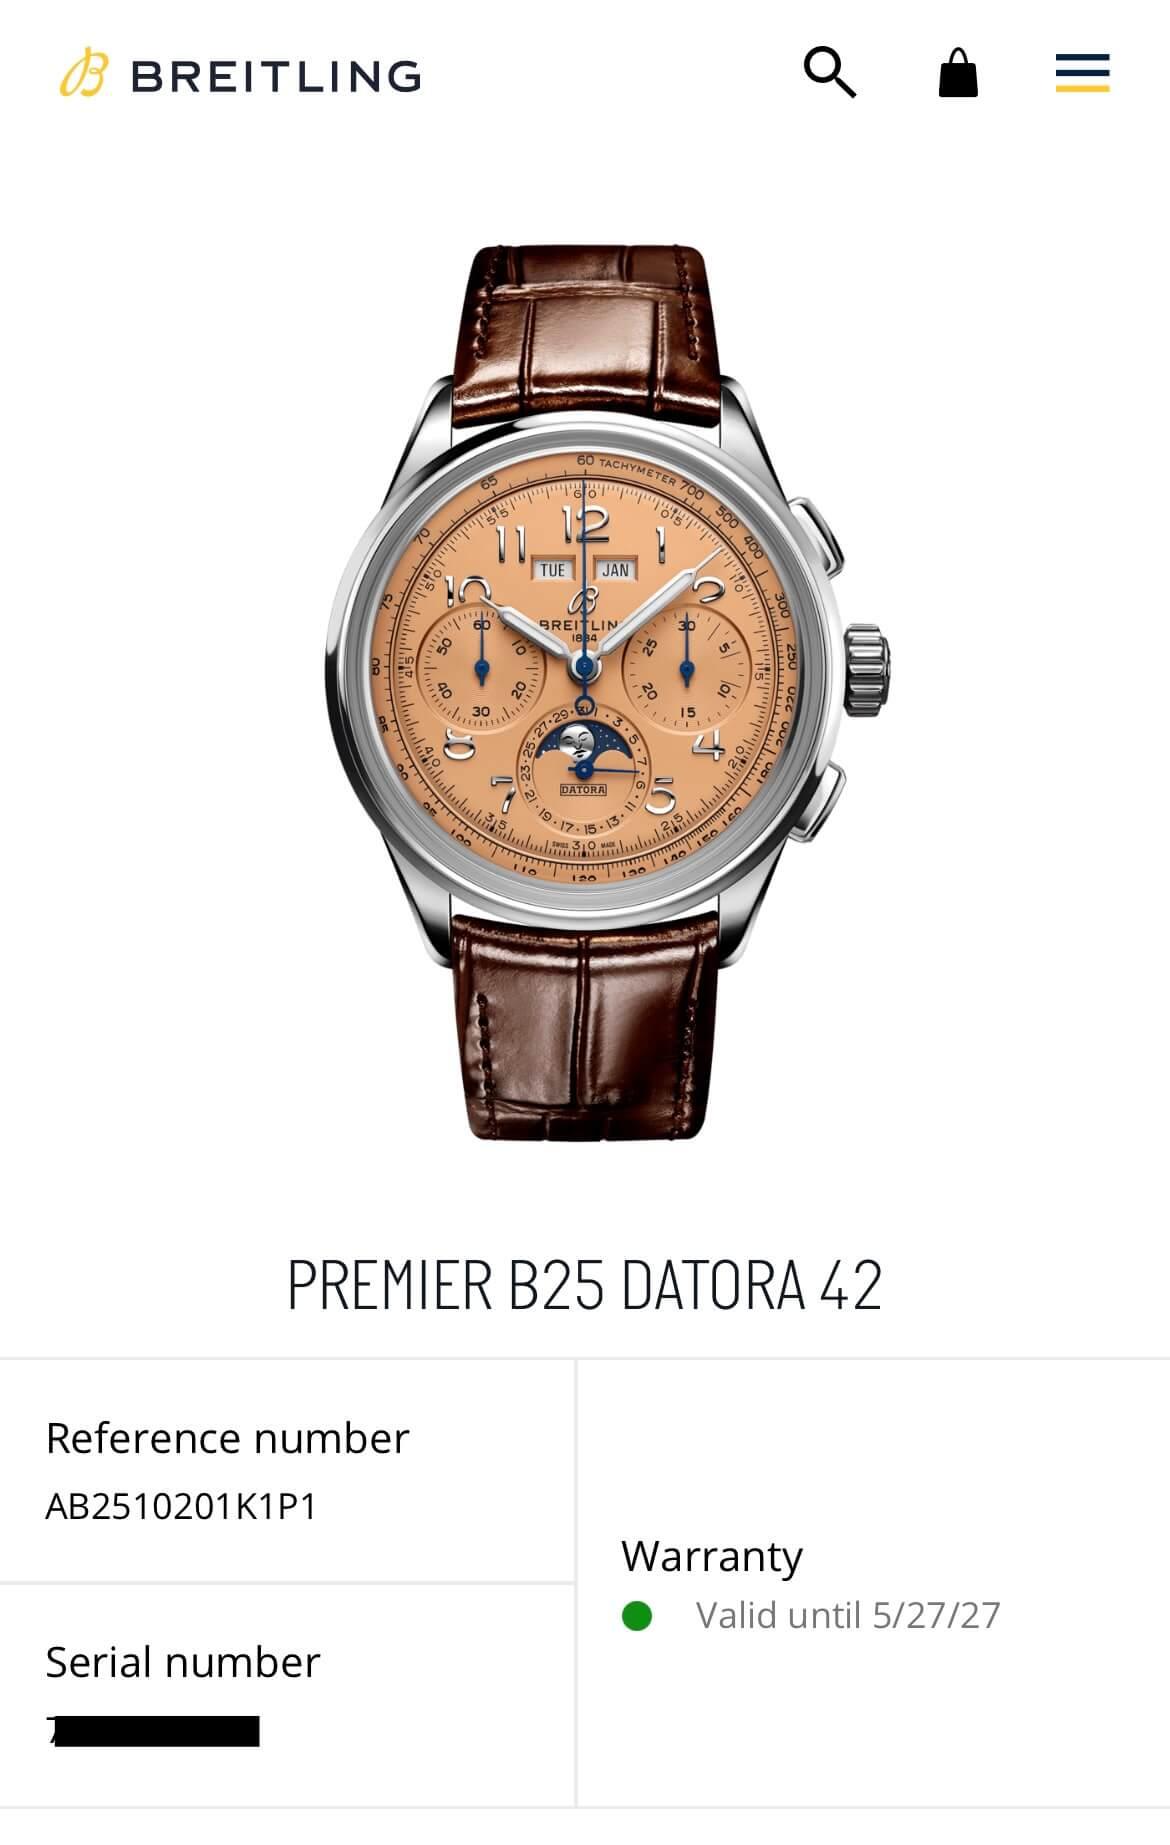 SOLD OUT: Breitling Premier B25 Datora AB2510 42MM Chronograph Calendar Salmon Dial Steel Box and Papers 2022 - WearingTime Luxury Watches